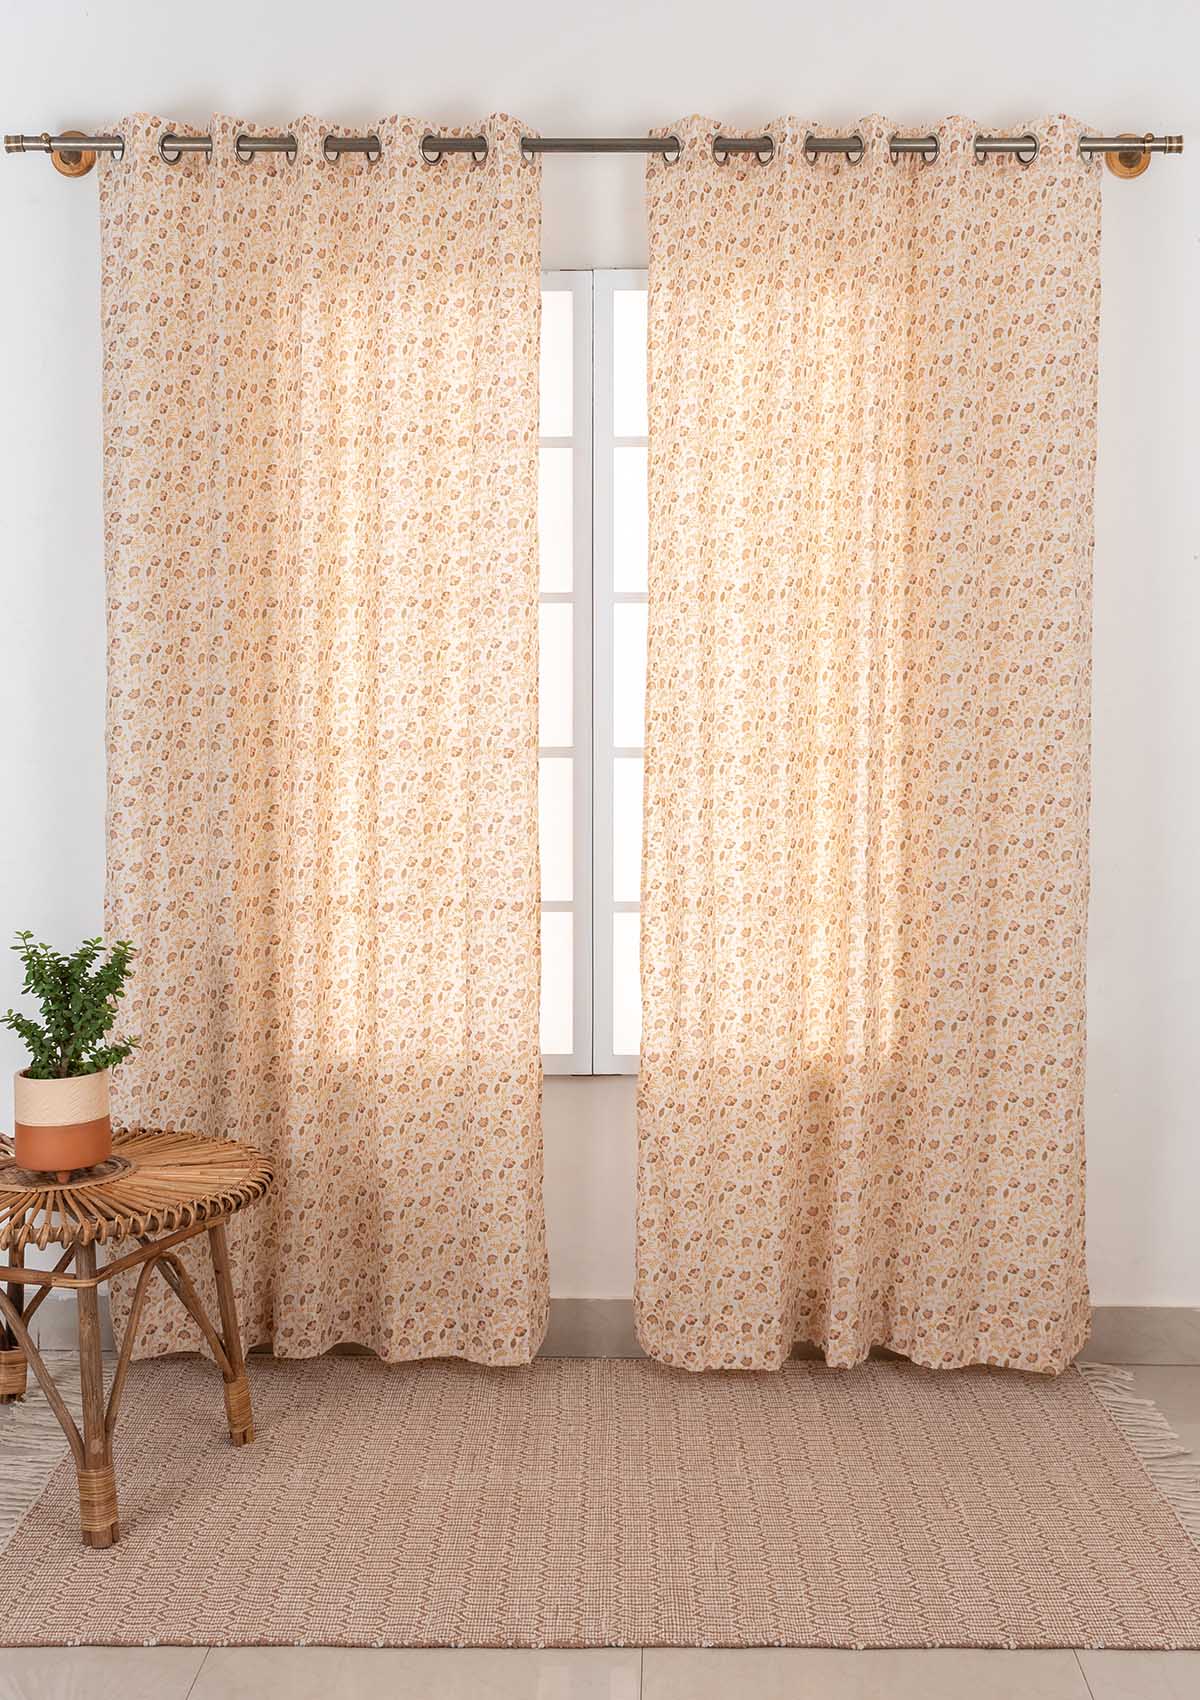 Calico 100% cotton ethnic sheer curtain for living room - Light filtering - Amber - Pack of 1